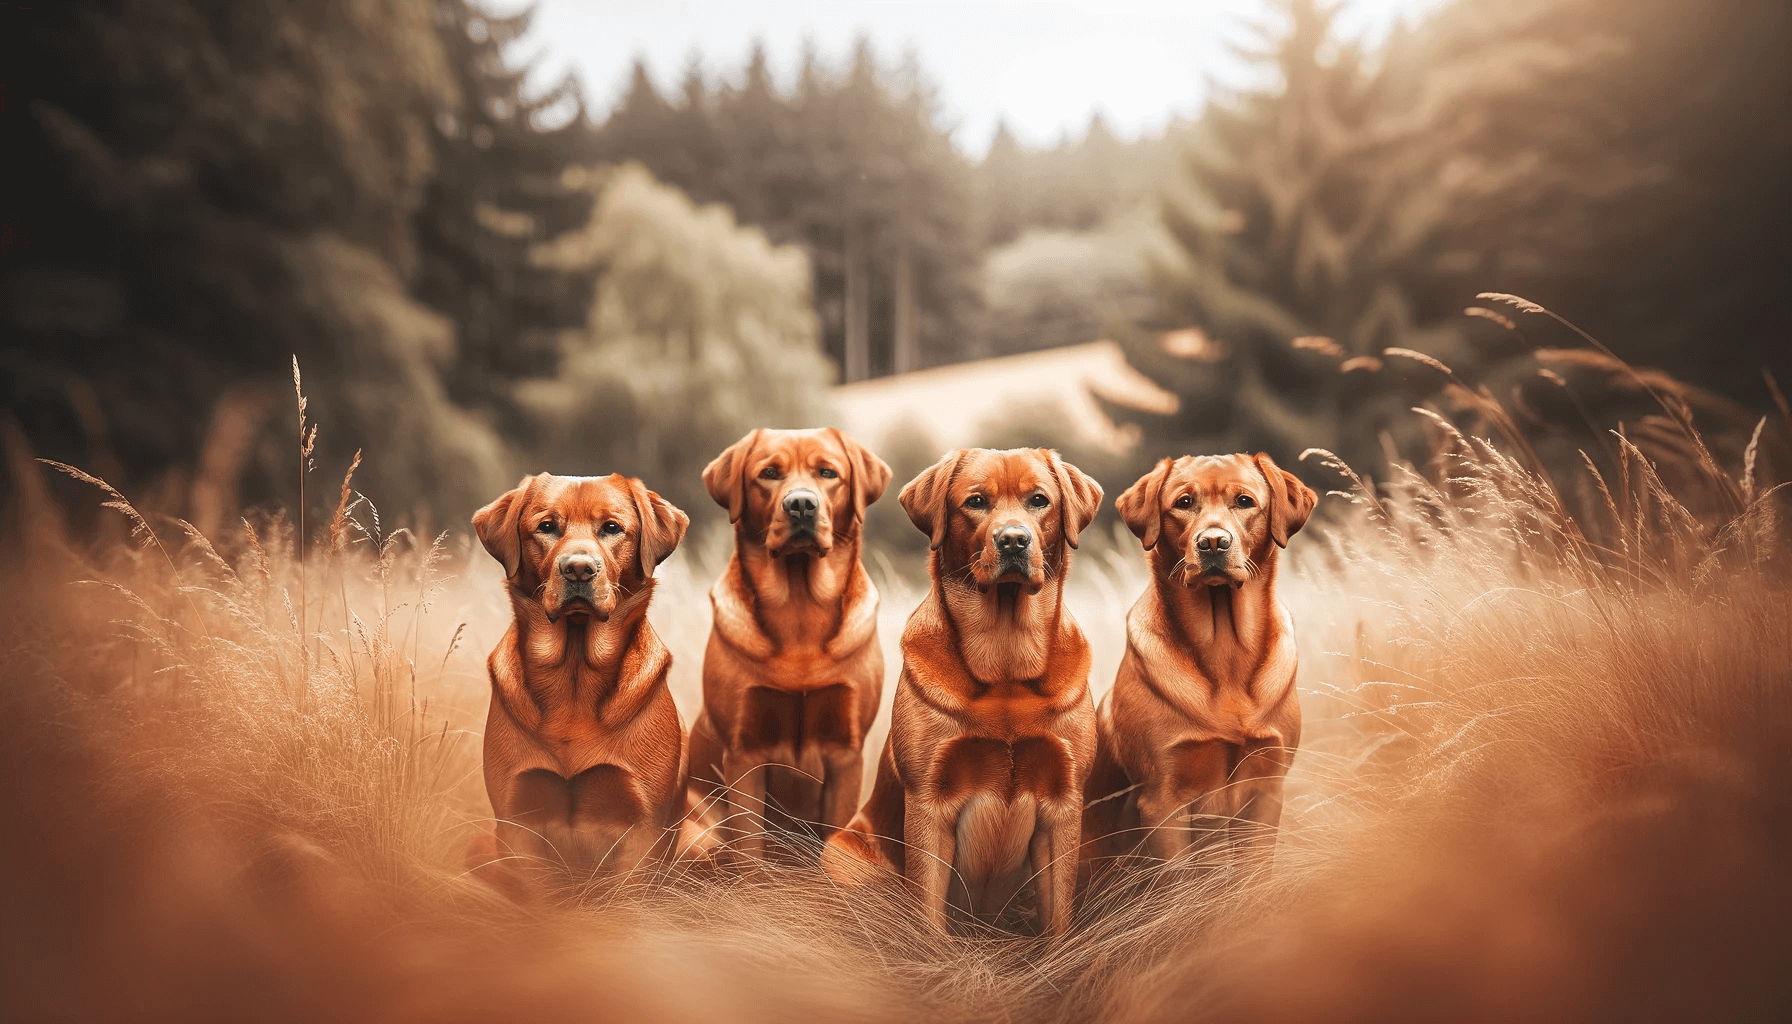 Four Red Fox Labrador Retrievers sitting in a field with tall grass and trees in the background